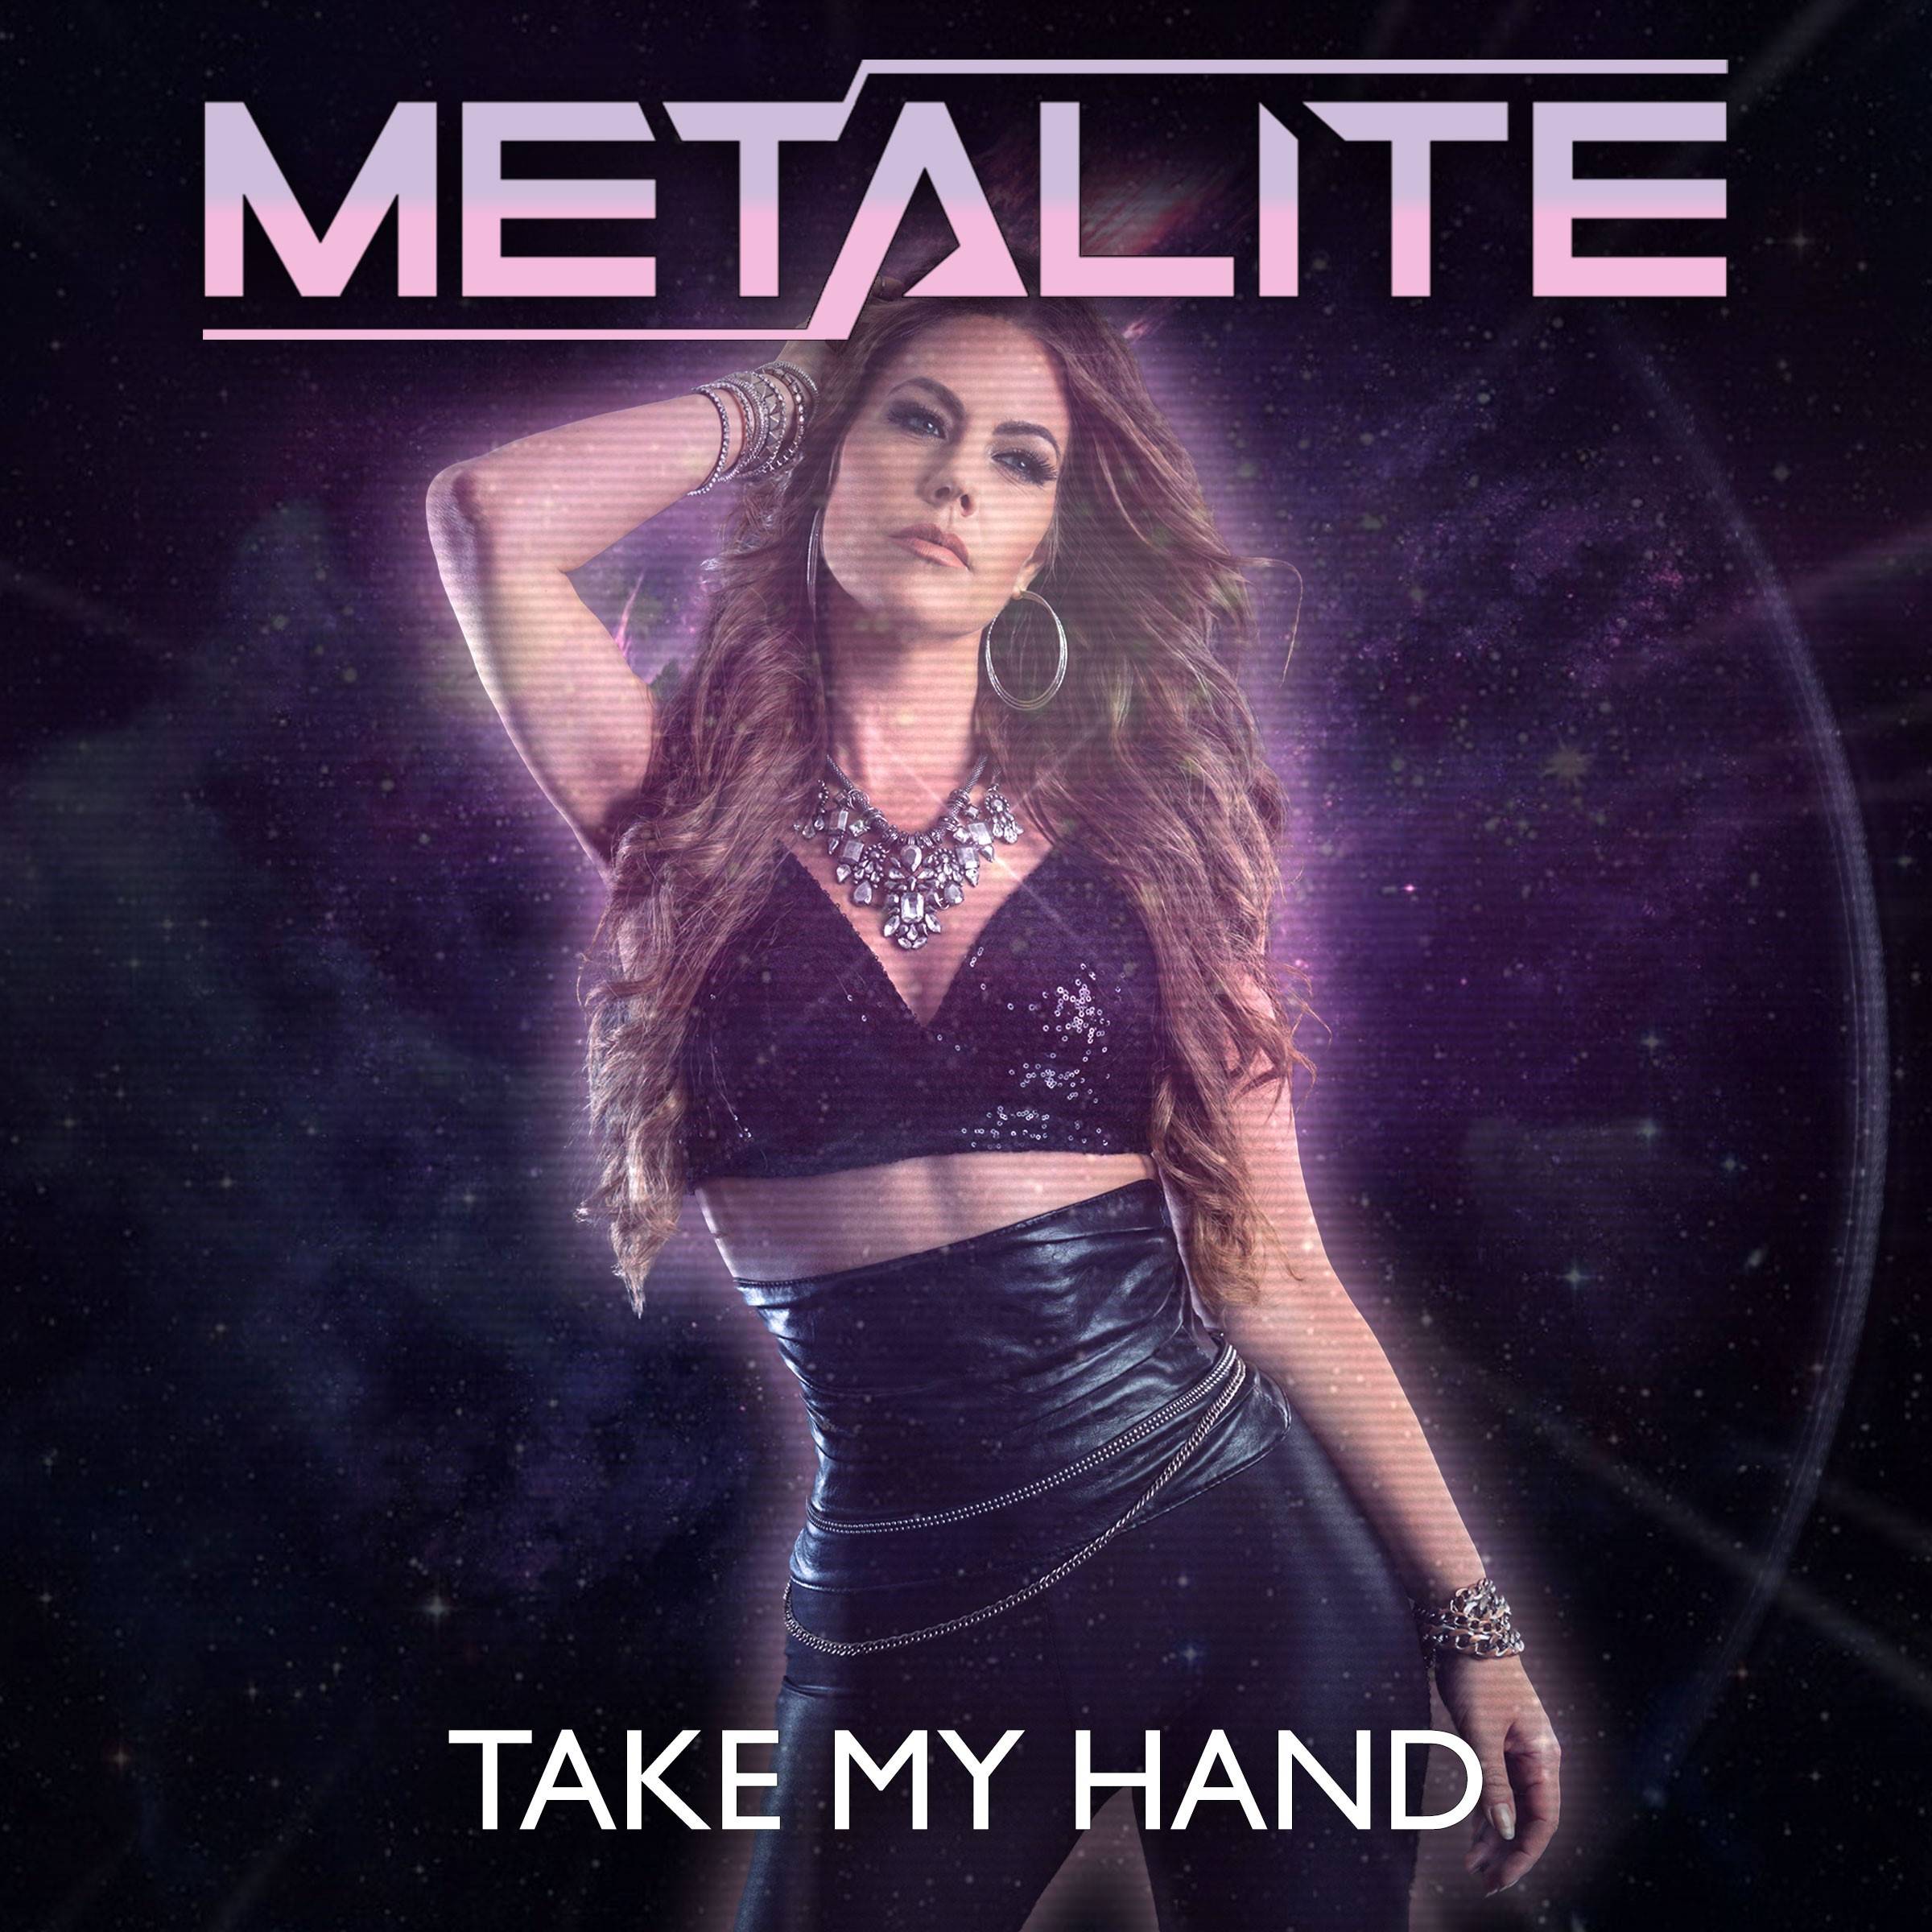 Metalite: "Take My Hand" Digital Single 17th MArch 2023 AFM Records.